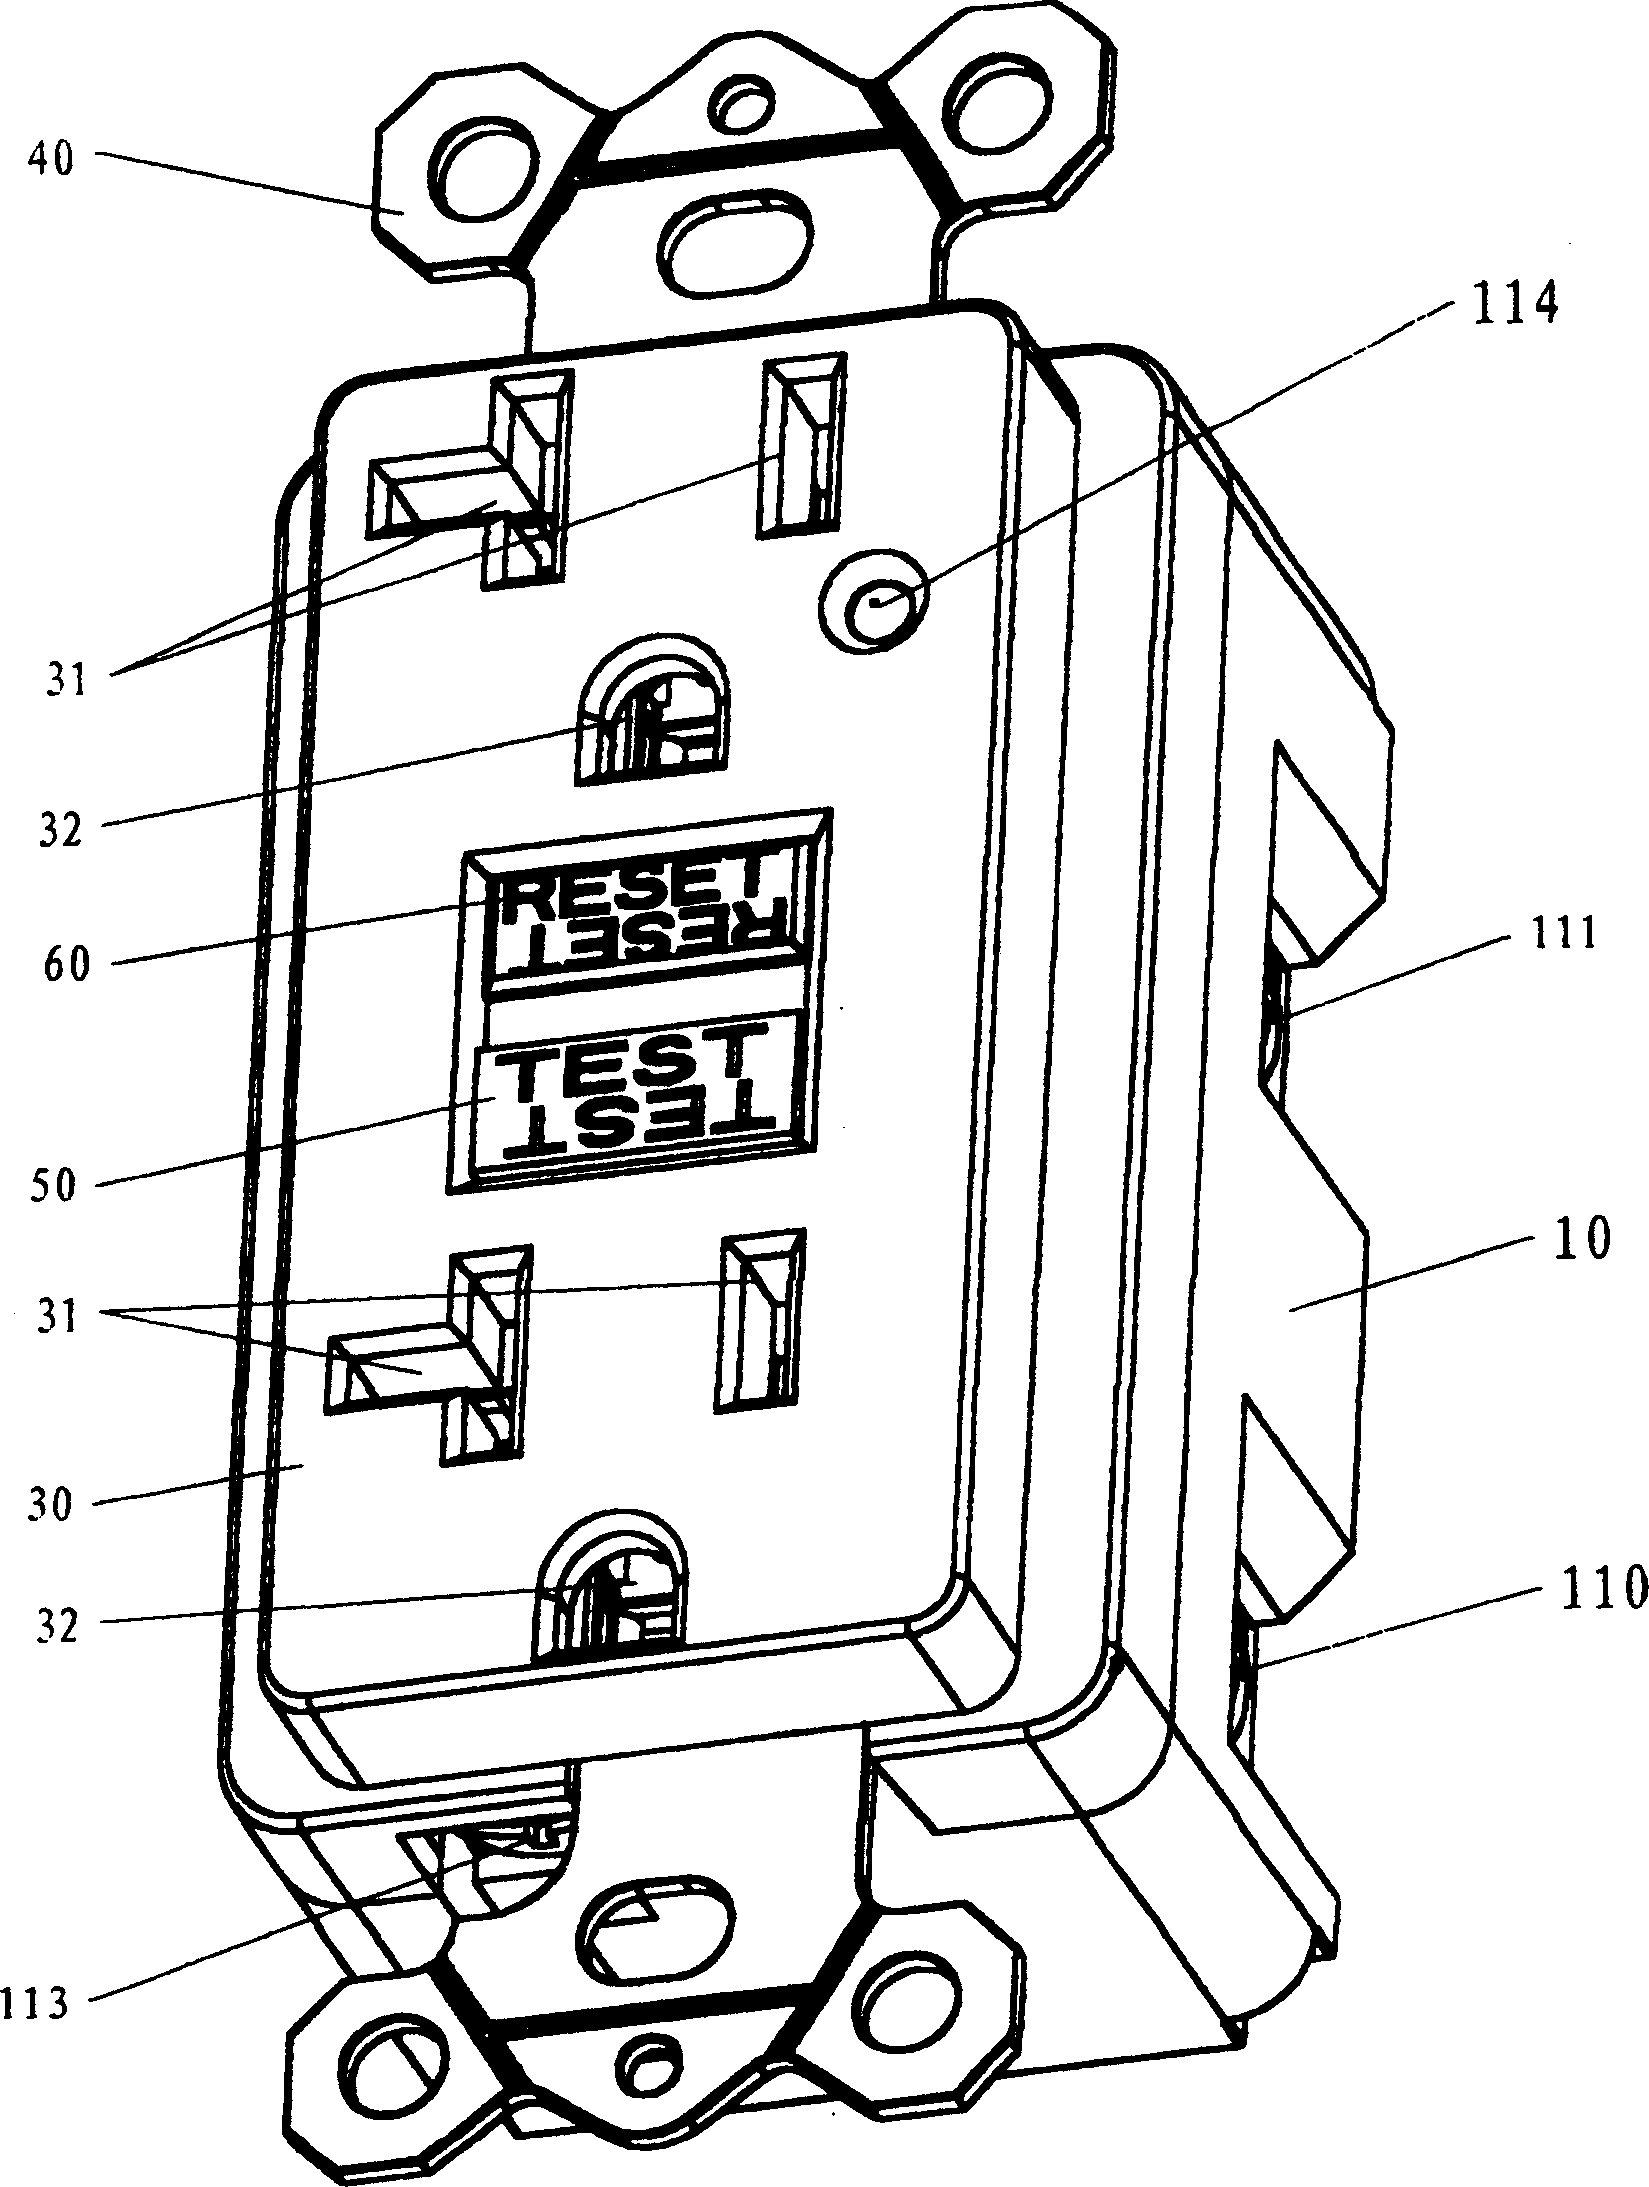 Inverted wiring protector for grounding fault circuit breaker